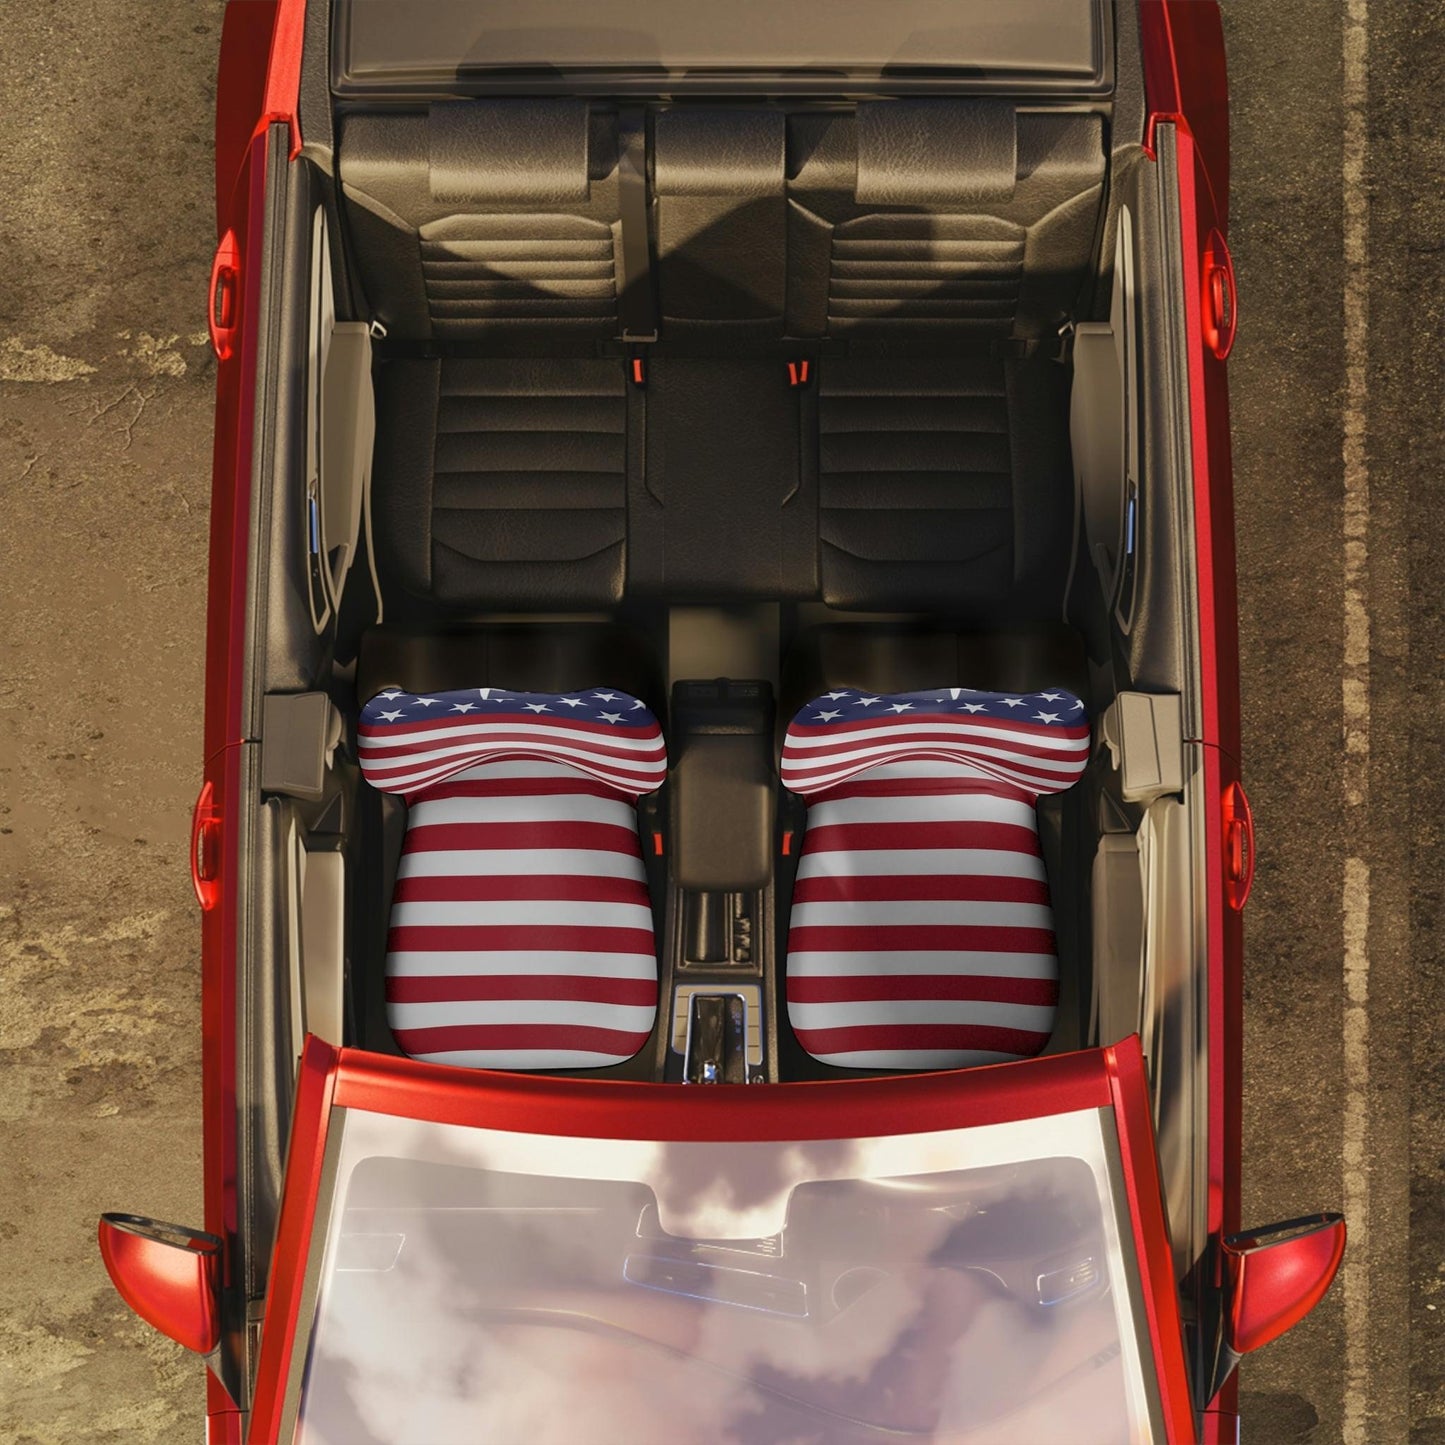 American Flag Car Seat Covers Universal / Gift for car lovers